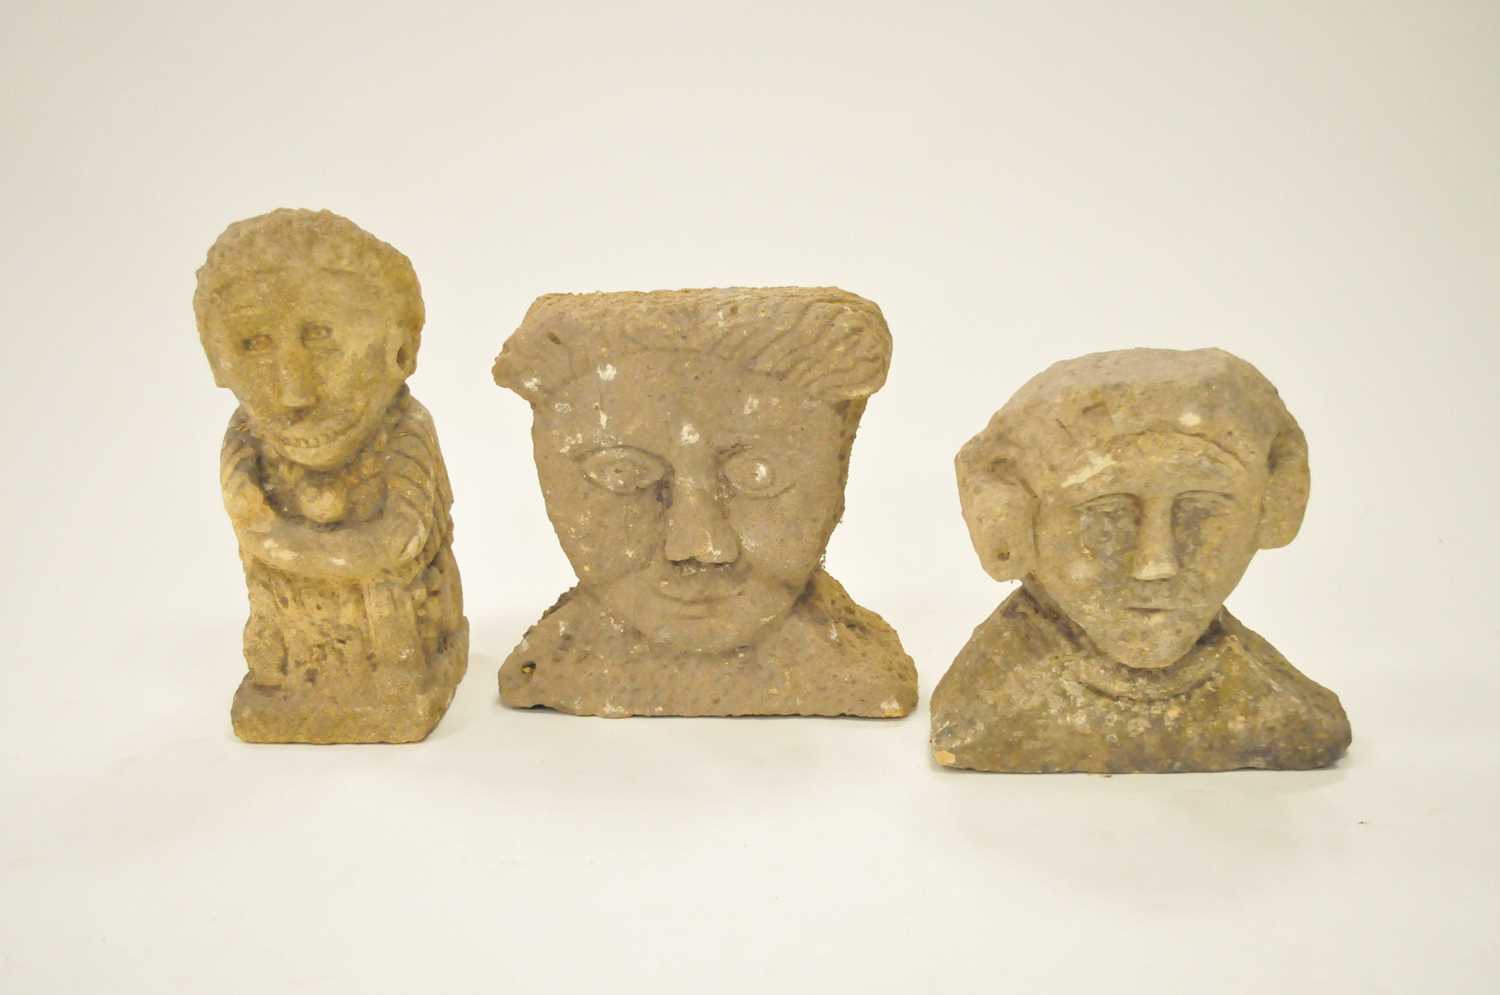 A stylised carved limestone figure and two stylised limestone busts